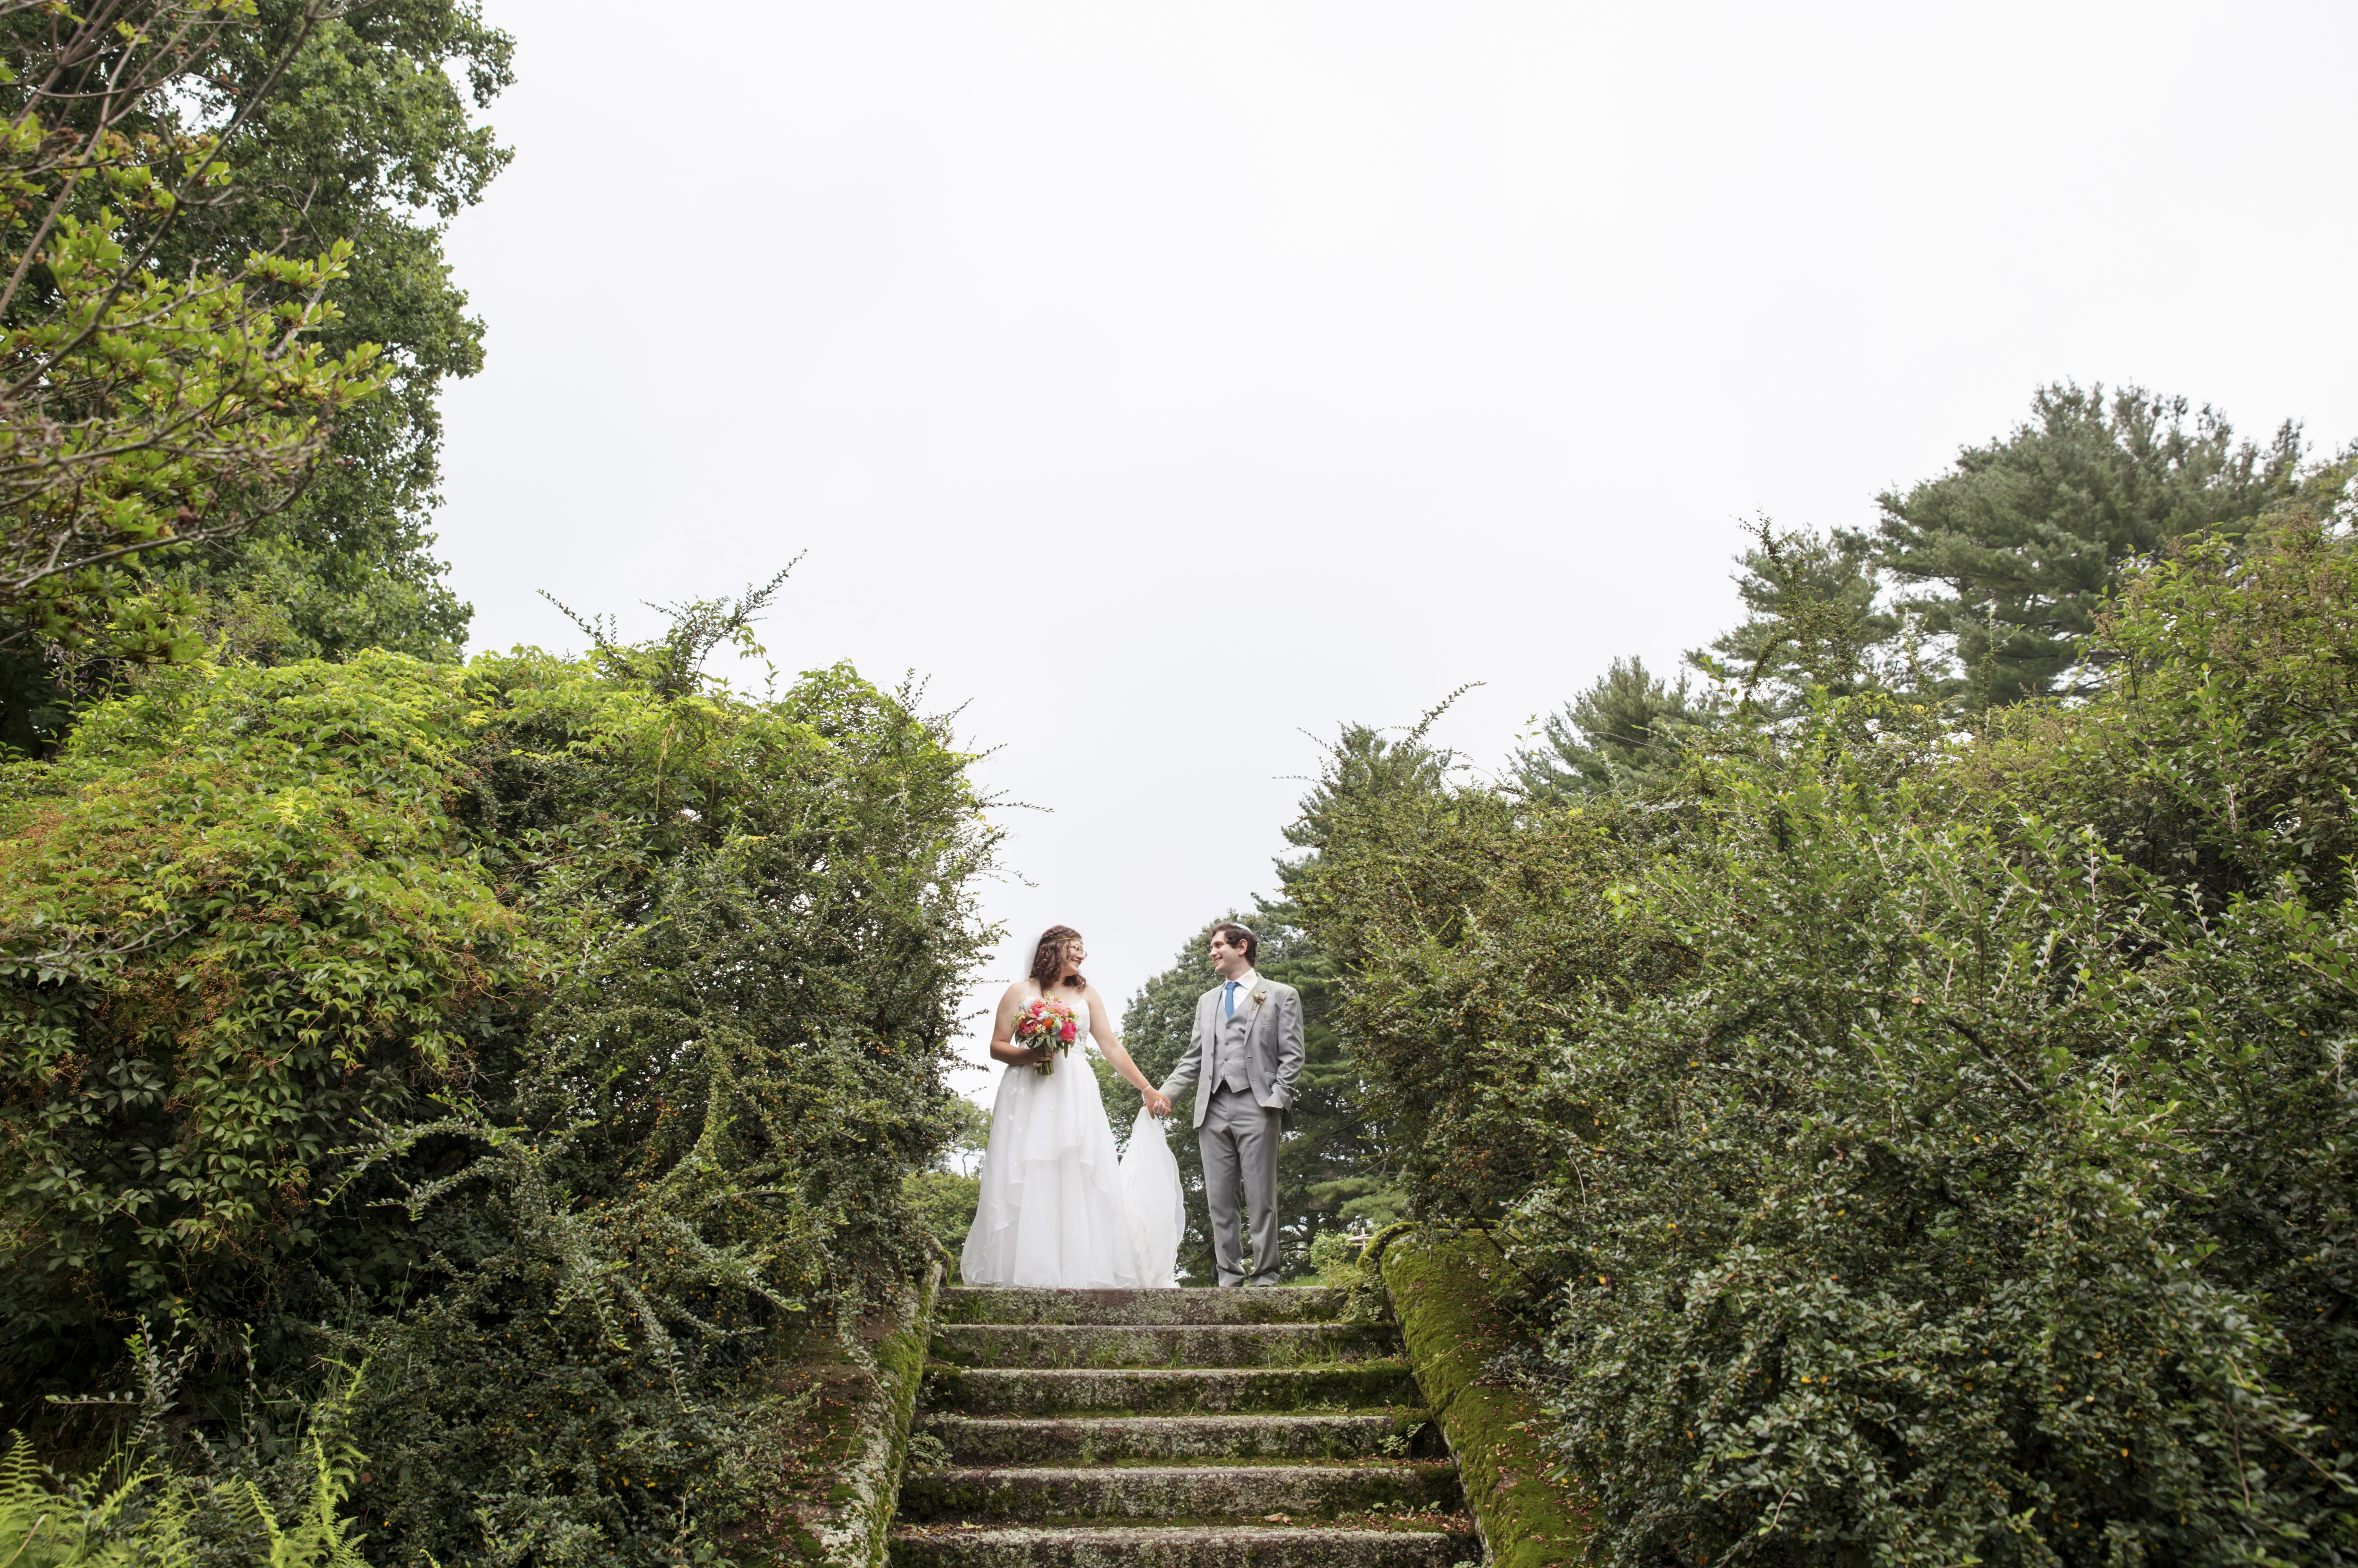 Non binary wedding couple poses at top of mossy steps at Moraine Farm.